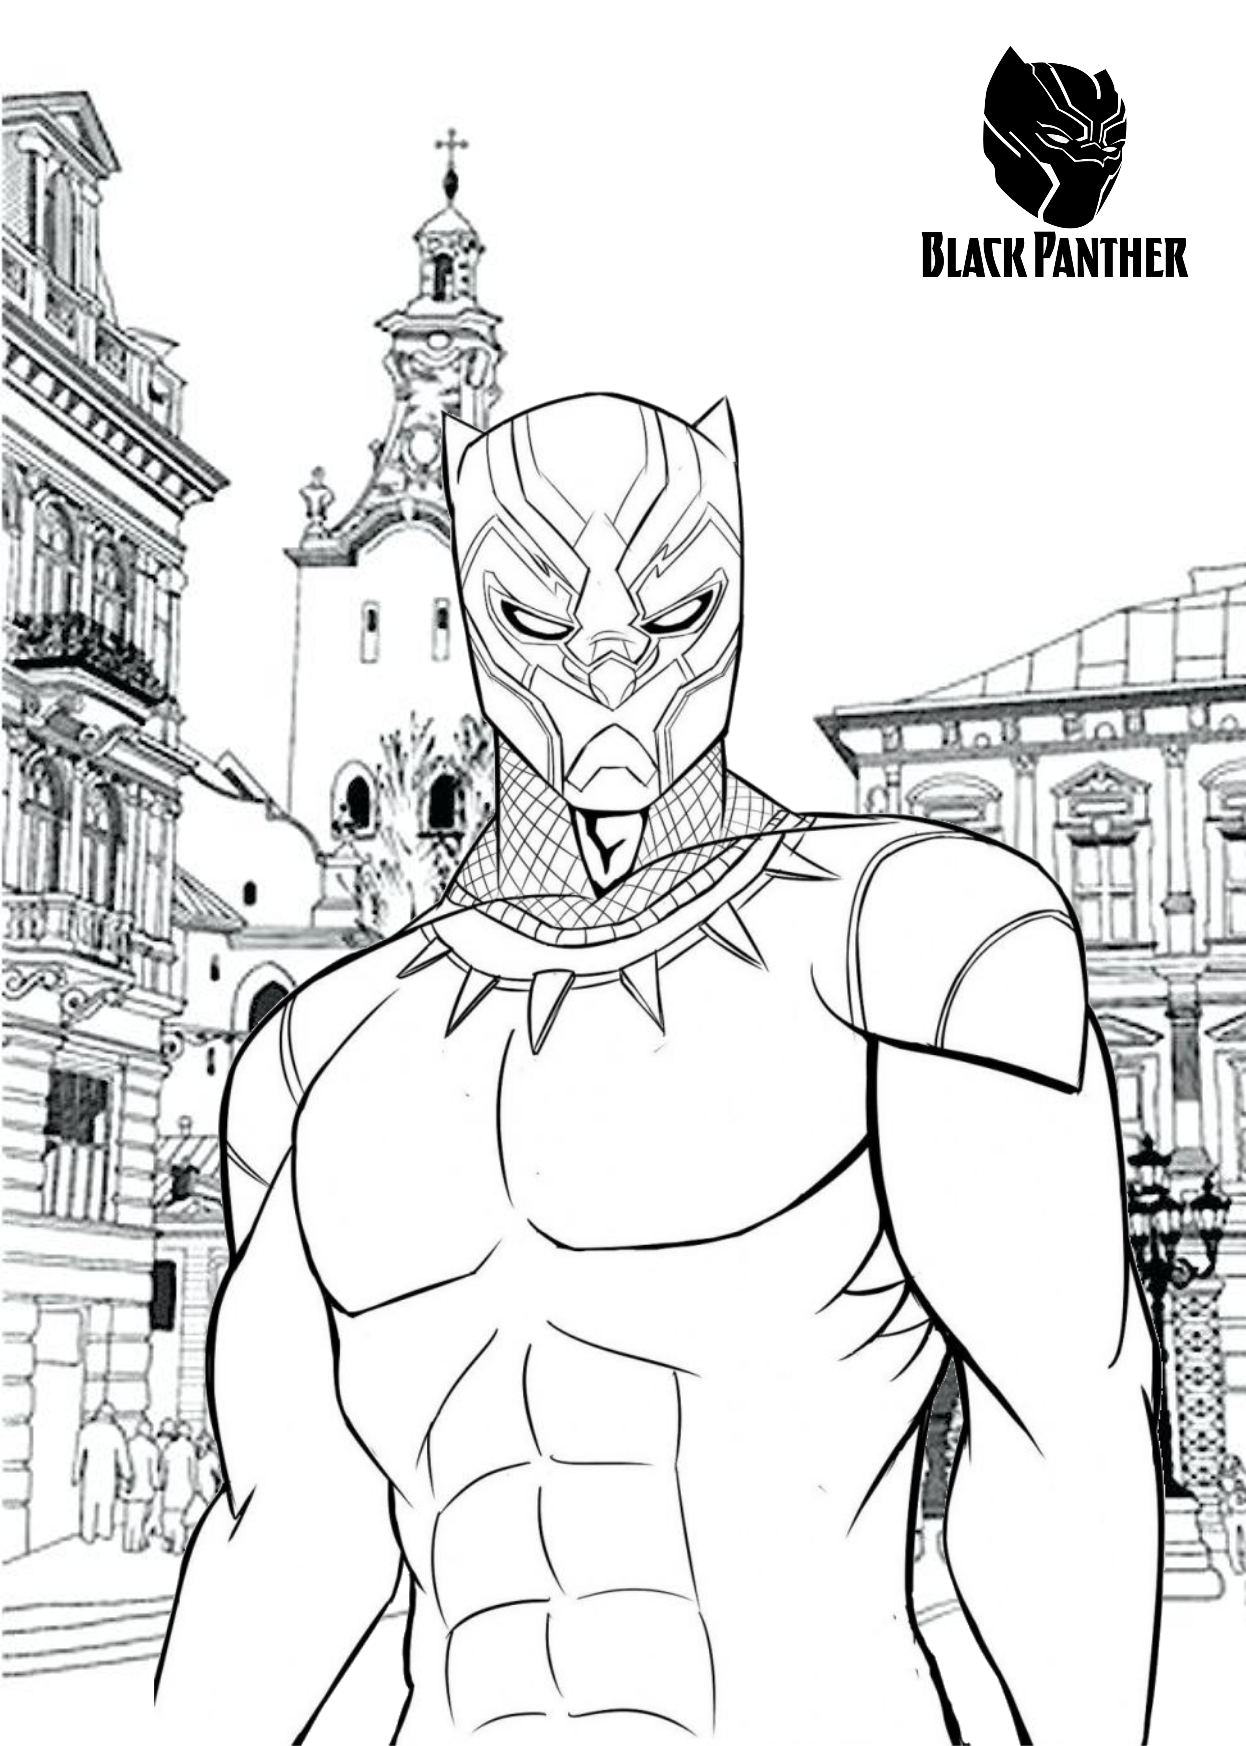 Black panther marvel comics character printable coloring pages on ...